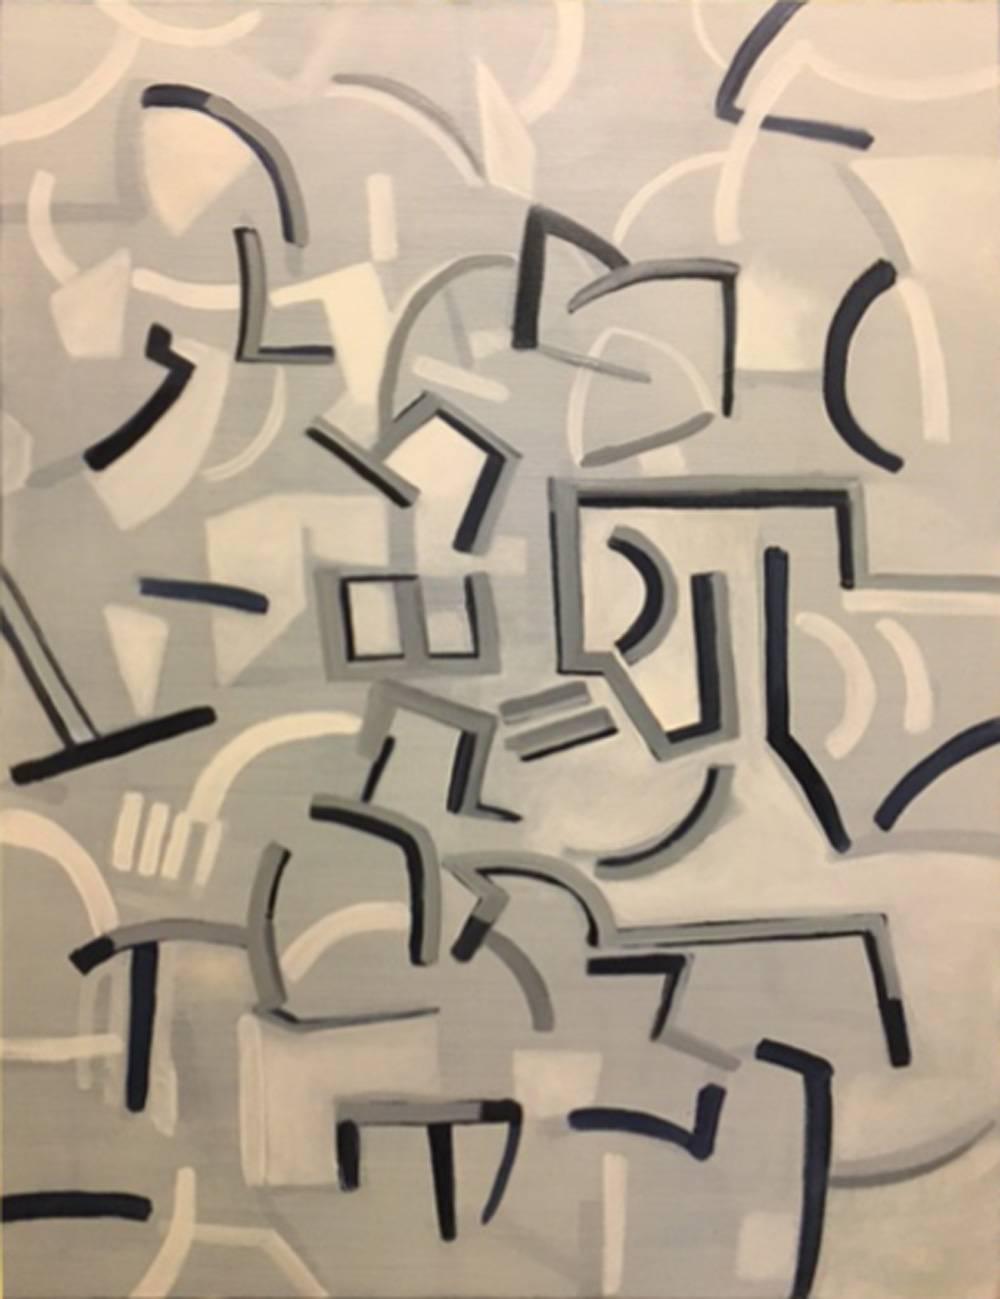 Intervention (Graffiti and Line Series) - Painting by Robert Petrick